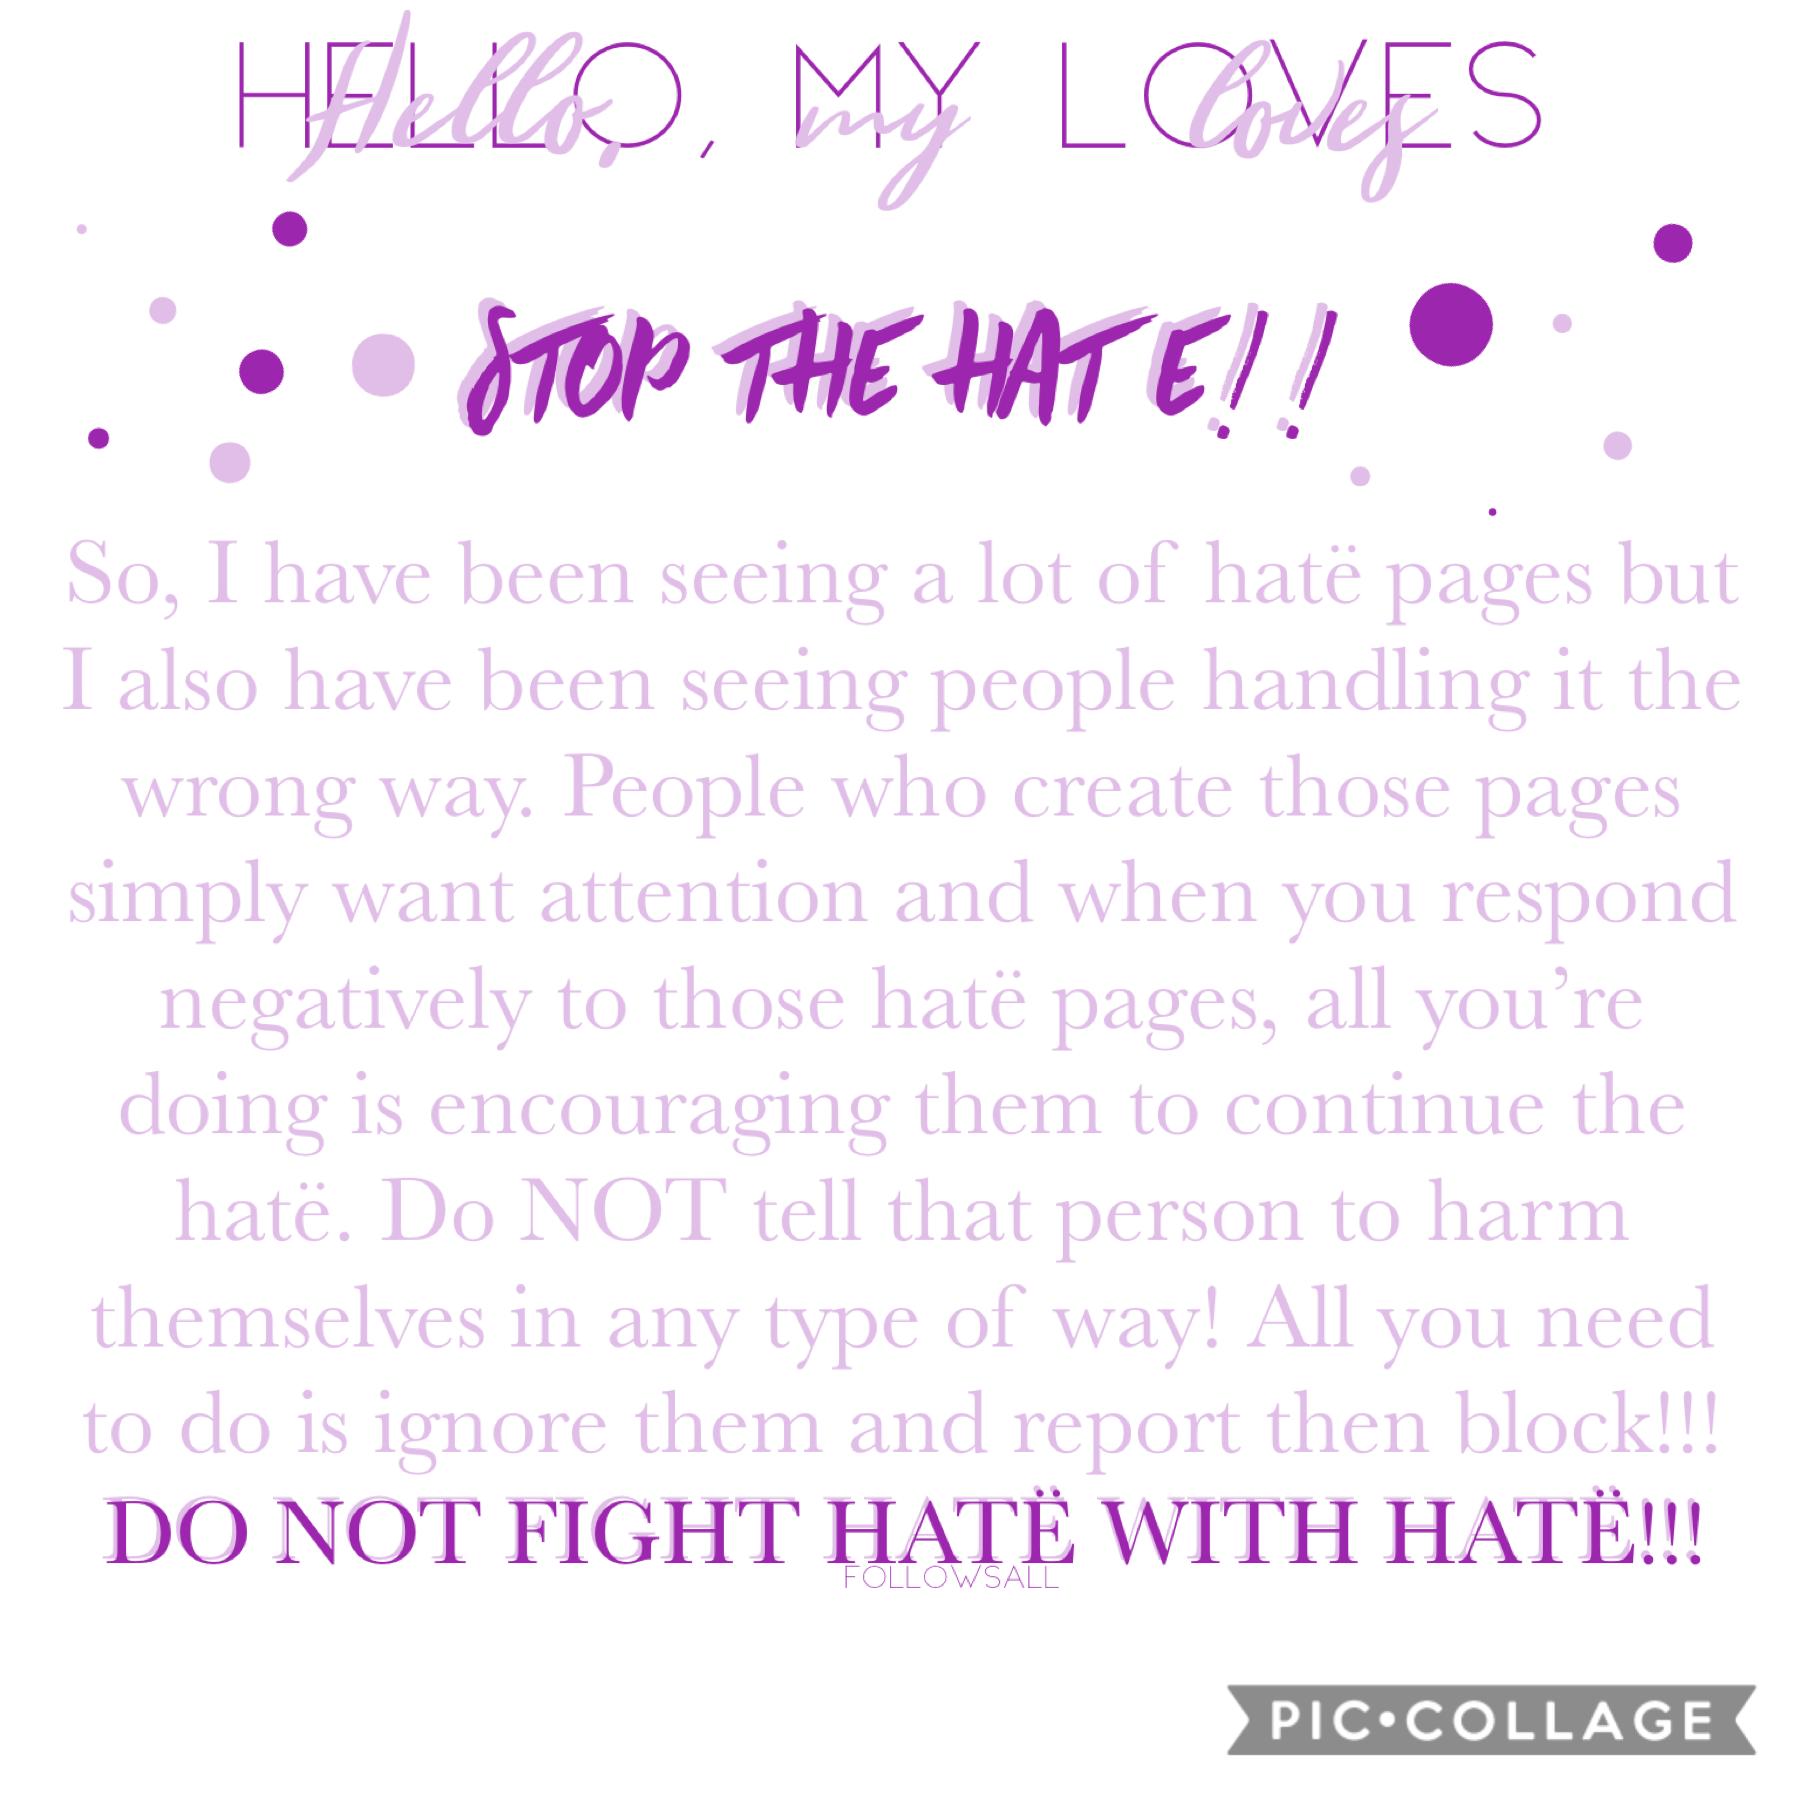 Do NOT bring that negativity to this app!! Don’t stoop to their level! All you need to do is report them and ignore! Telling people to hurt themselves is NOT okay no matter the situation!